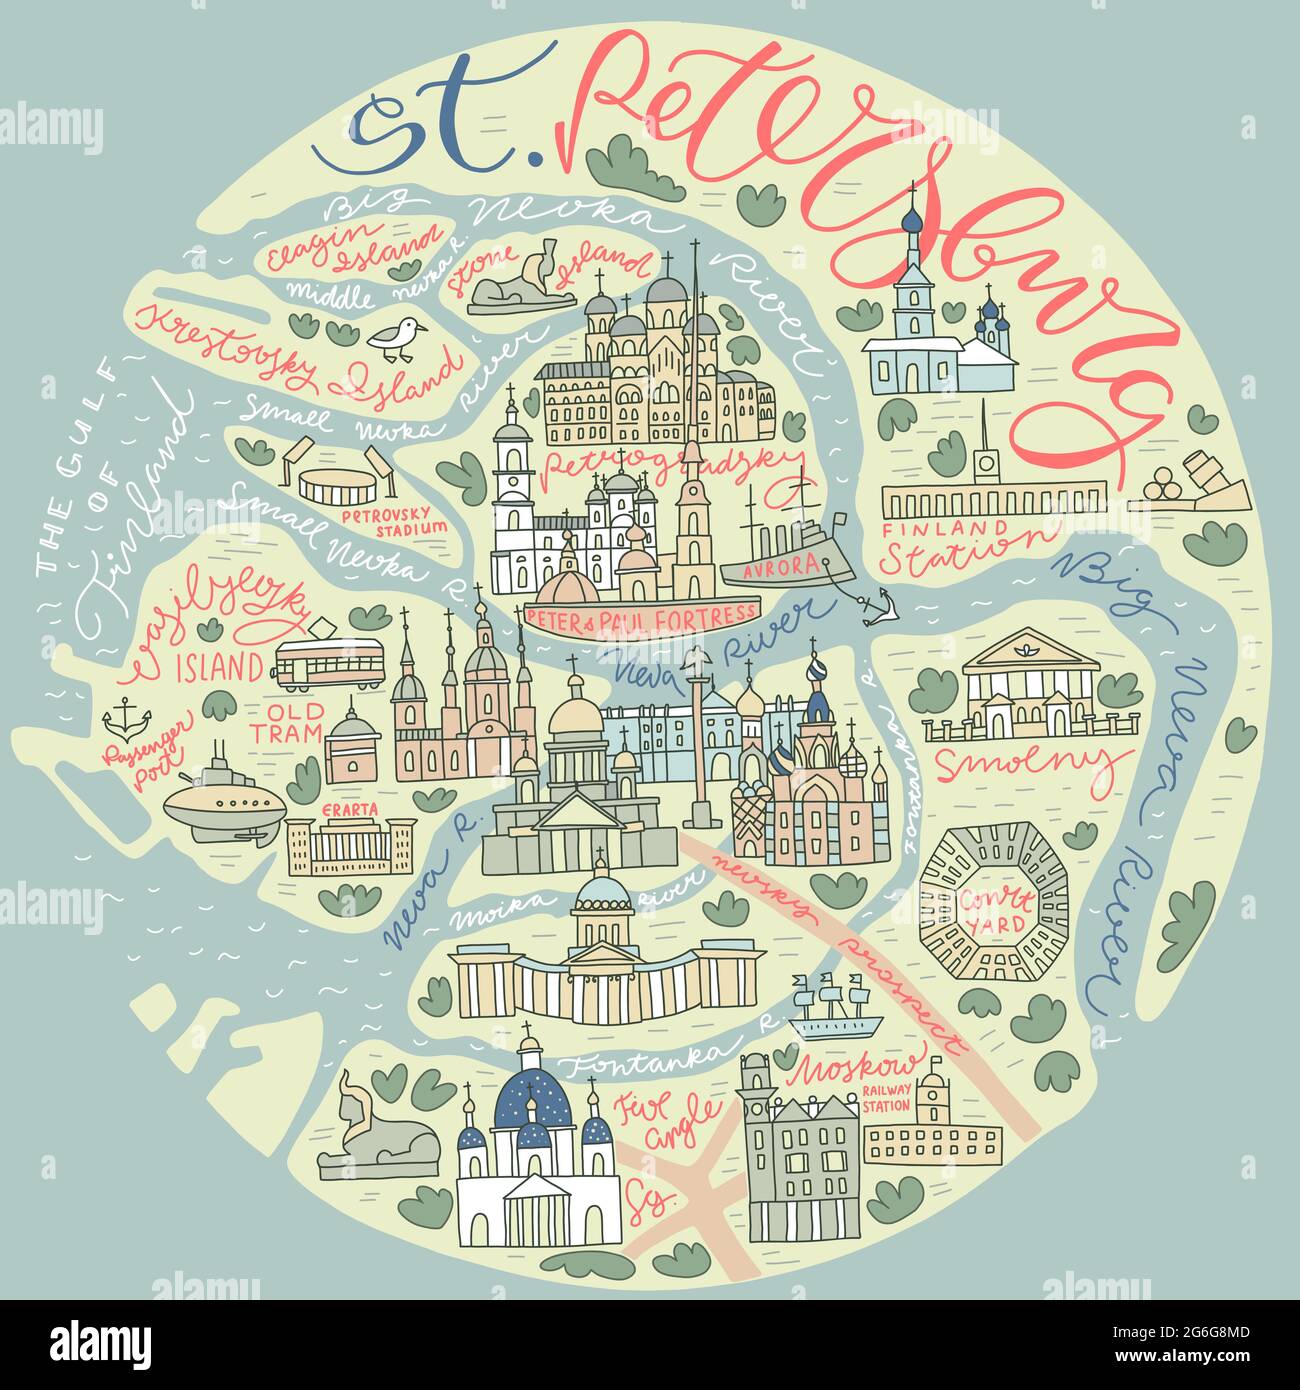 Saint Petersburt - Russia north capital map vector hand drawn illustration. Doodle architecture & map elements - rivers, roads and trees signed with l Stock Vector